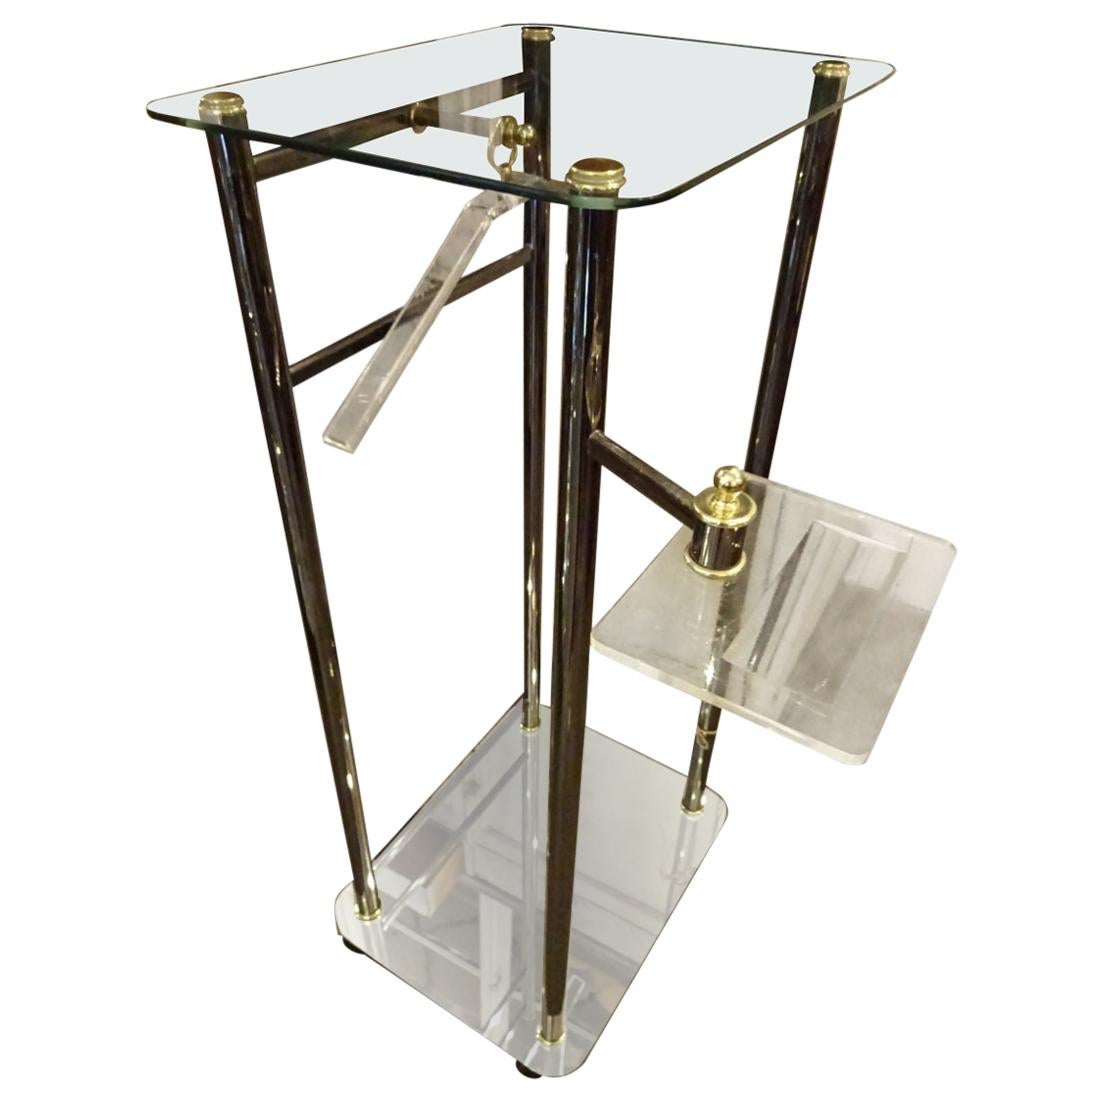 1960s-1970s France Cool and Detailed Valet-Plexi Glass, Chrome, Brass and Glass